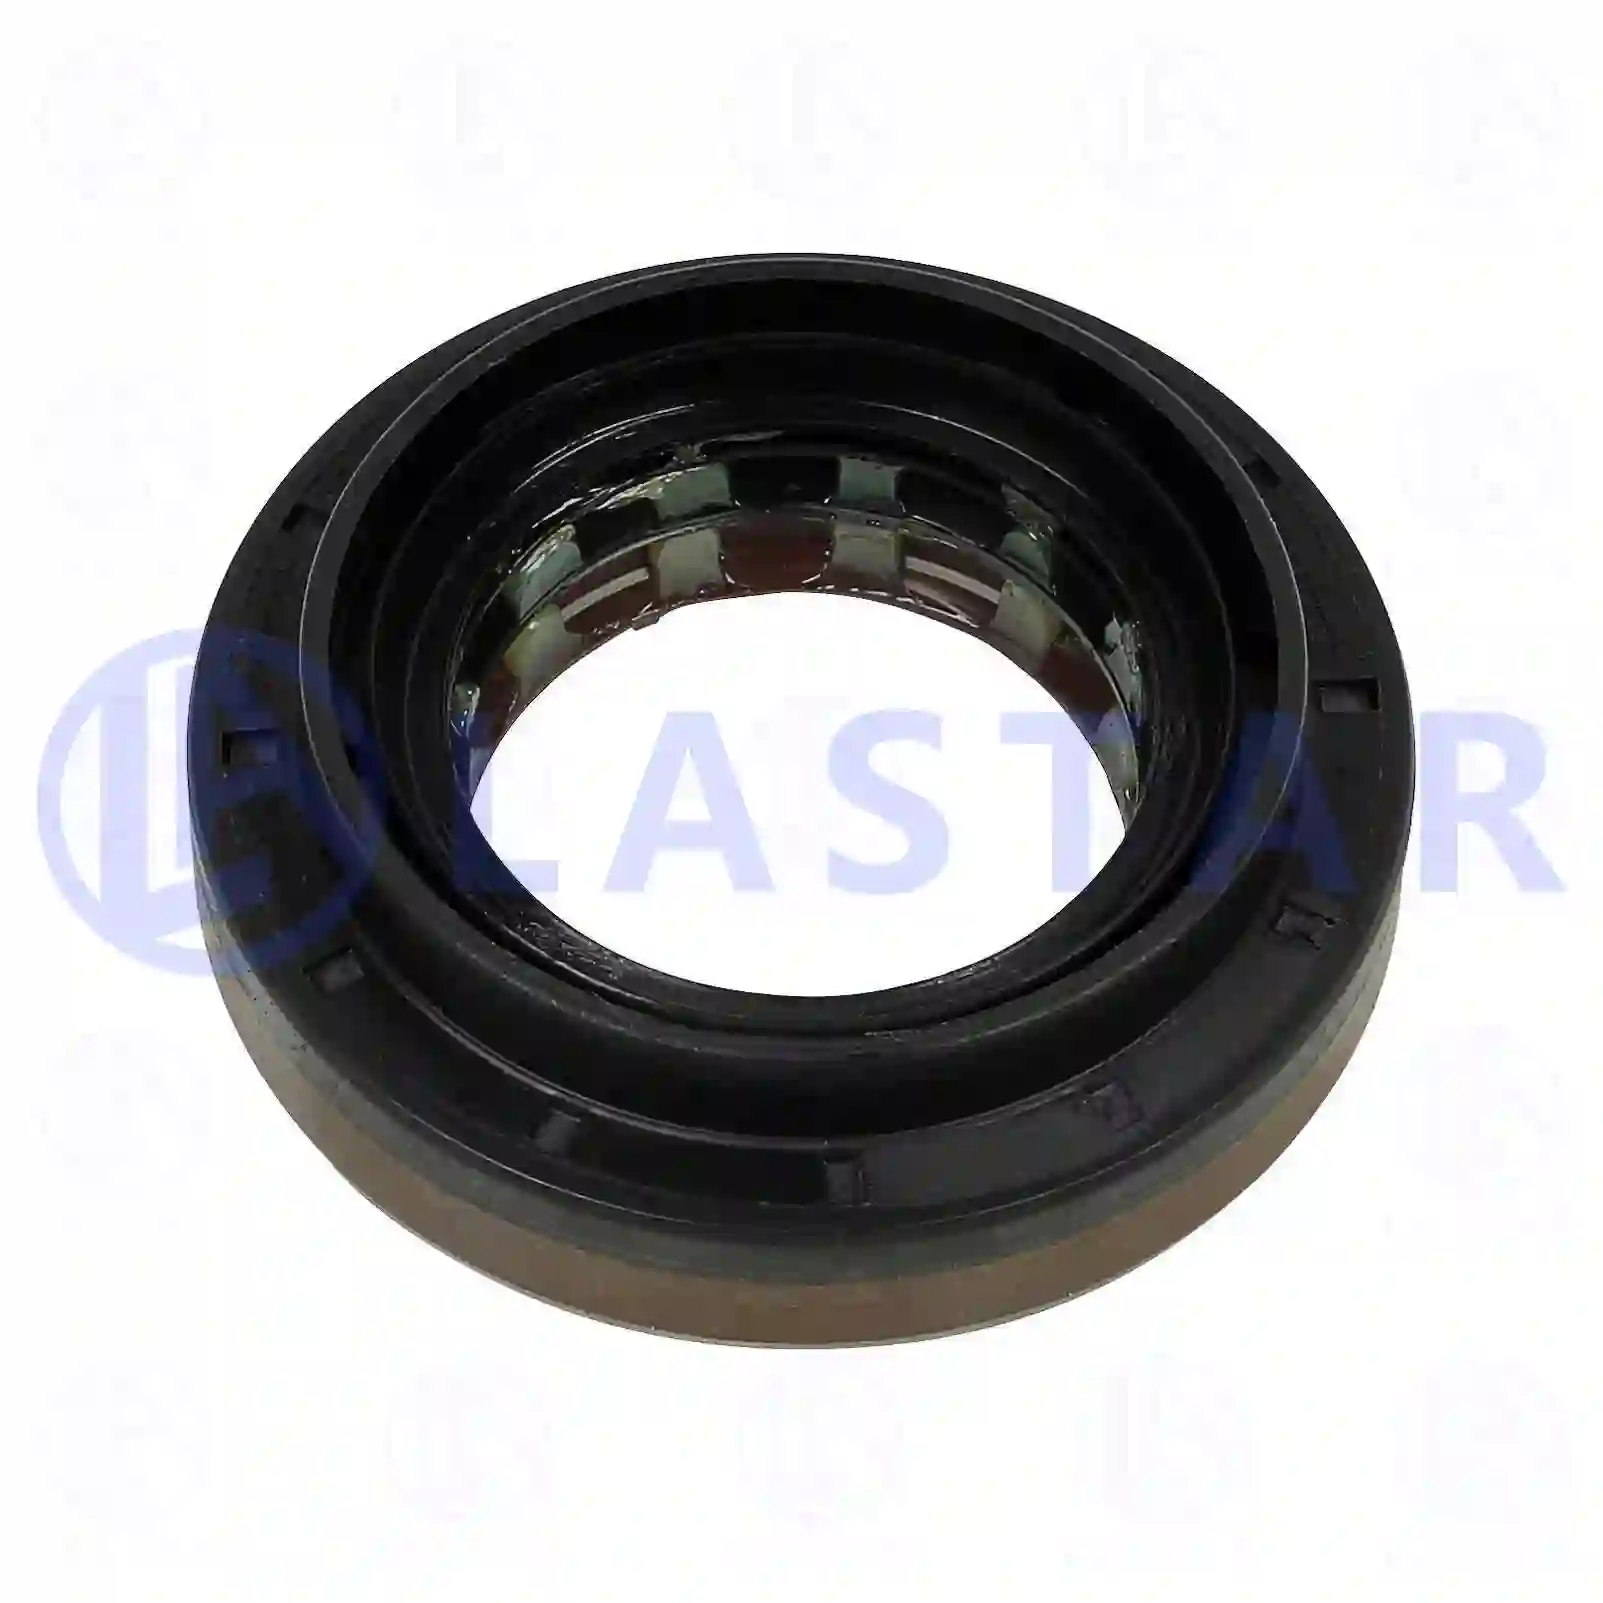 Oil seal, 77730610, 5103900AA, 0079971047, 0079976447, 0079976747, 0089973647, 0089978147, 0169975847, 0179974447, 0179975547, 0189970547, 0189971747, 4639970547, 2D0501317, ZG02726-0008 ||  77730610 Lastar Spare Part | Truck Spare Parts, Auotomotive Spare Parts Oil seal, 77730610, 5103900AA, 0079971047, 0079976447, 0079976747, 0089973647, 0089978147, 0169975847, 0179974447, 0179975547, 0189970547, 0189971747, 4639970547, 2D0501317, ZG02726-0008 ||  77730610 Lastar Spare Part | Truck Spare Parts, Auotomotive Spare Parts